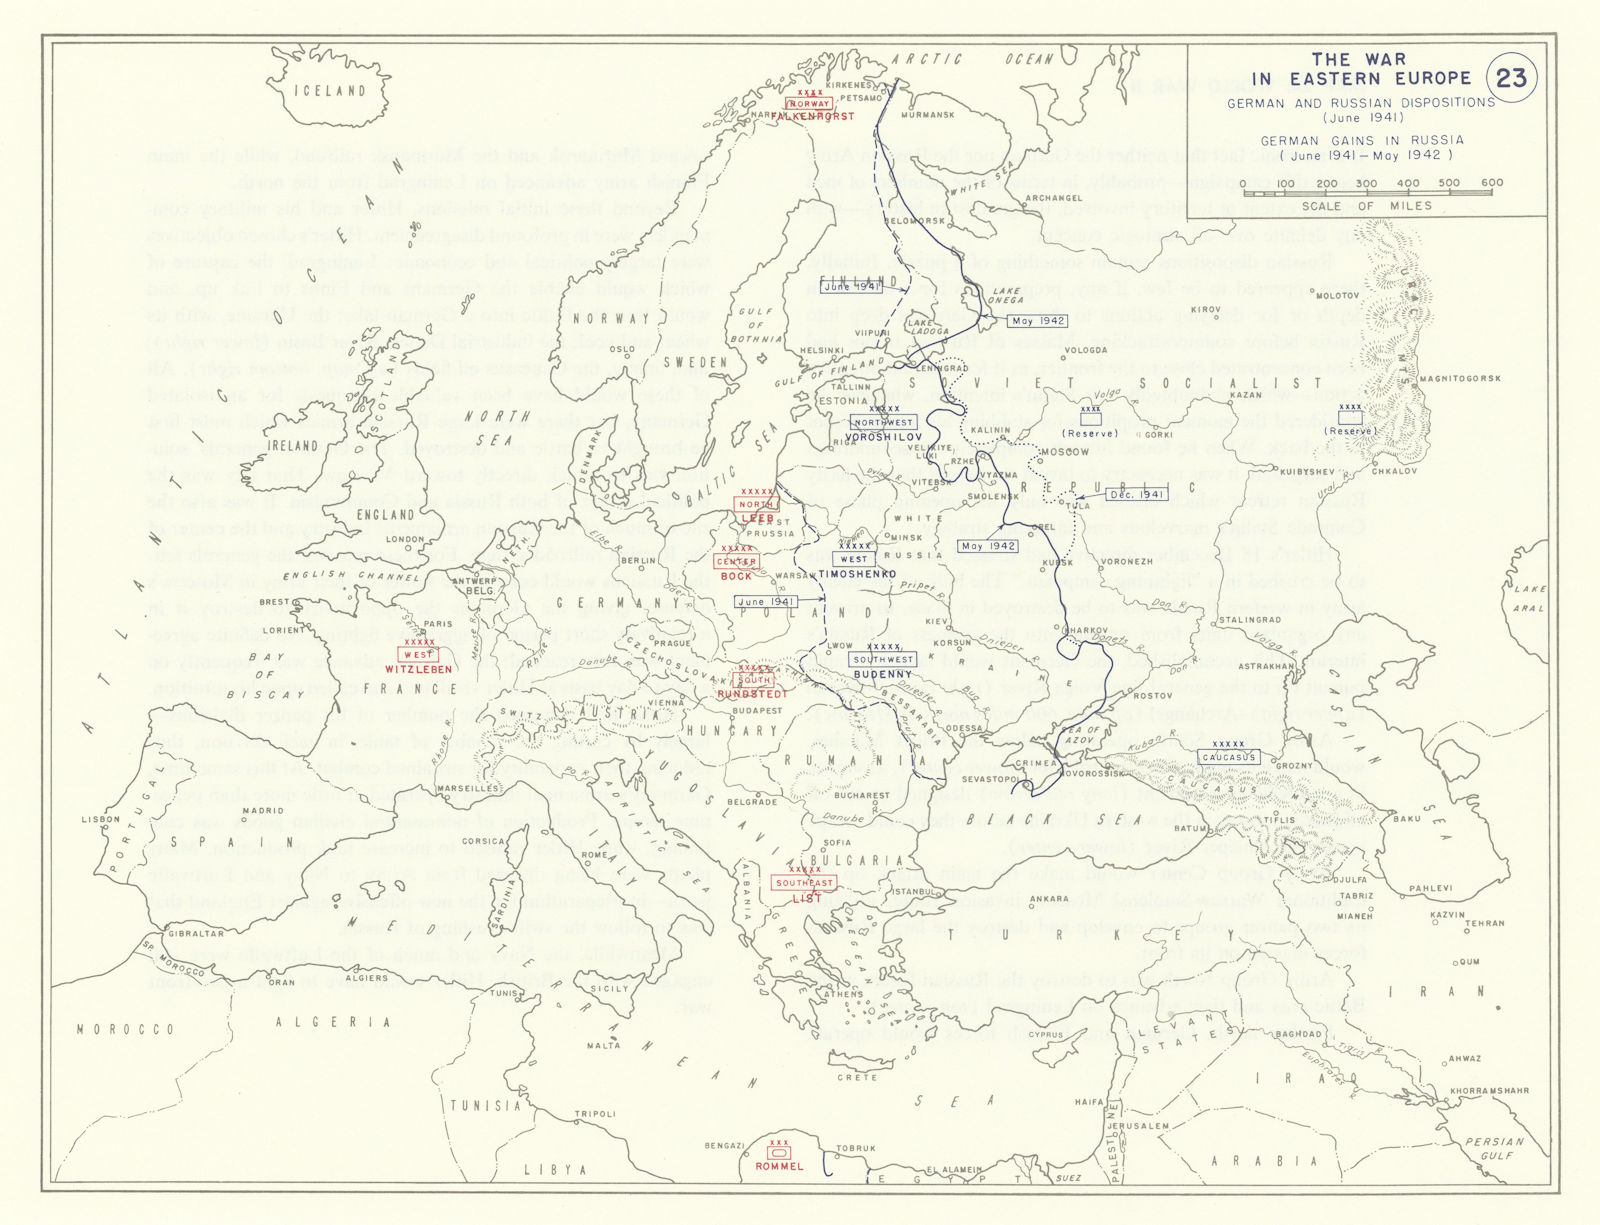 World War 2. Eastern Front. June 1941-May 1942 German gains in Russia 1959 map